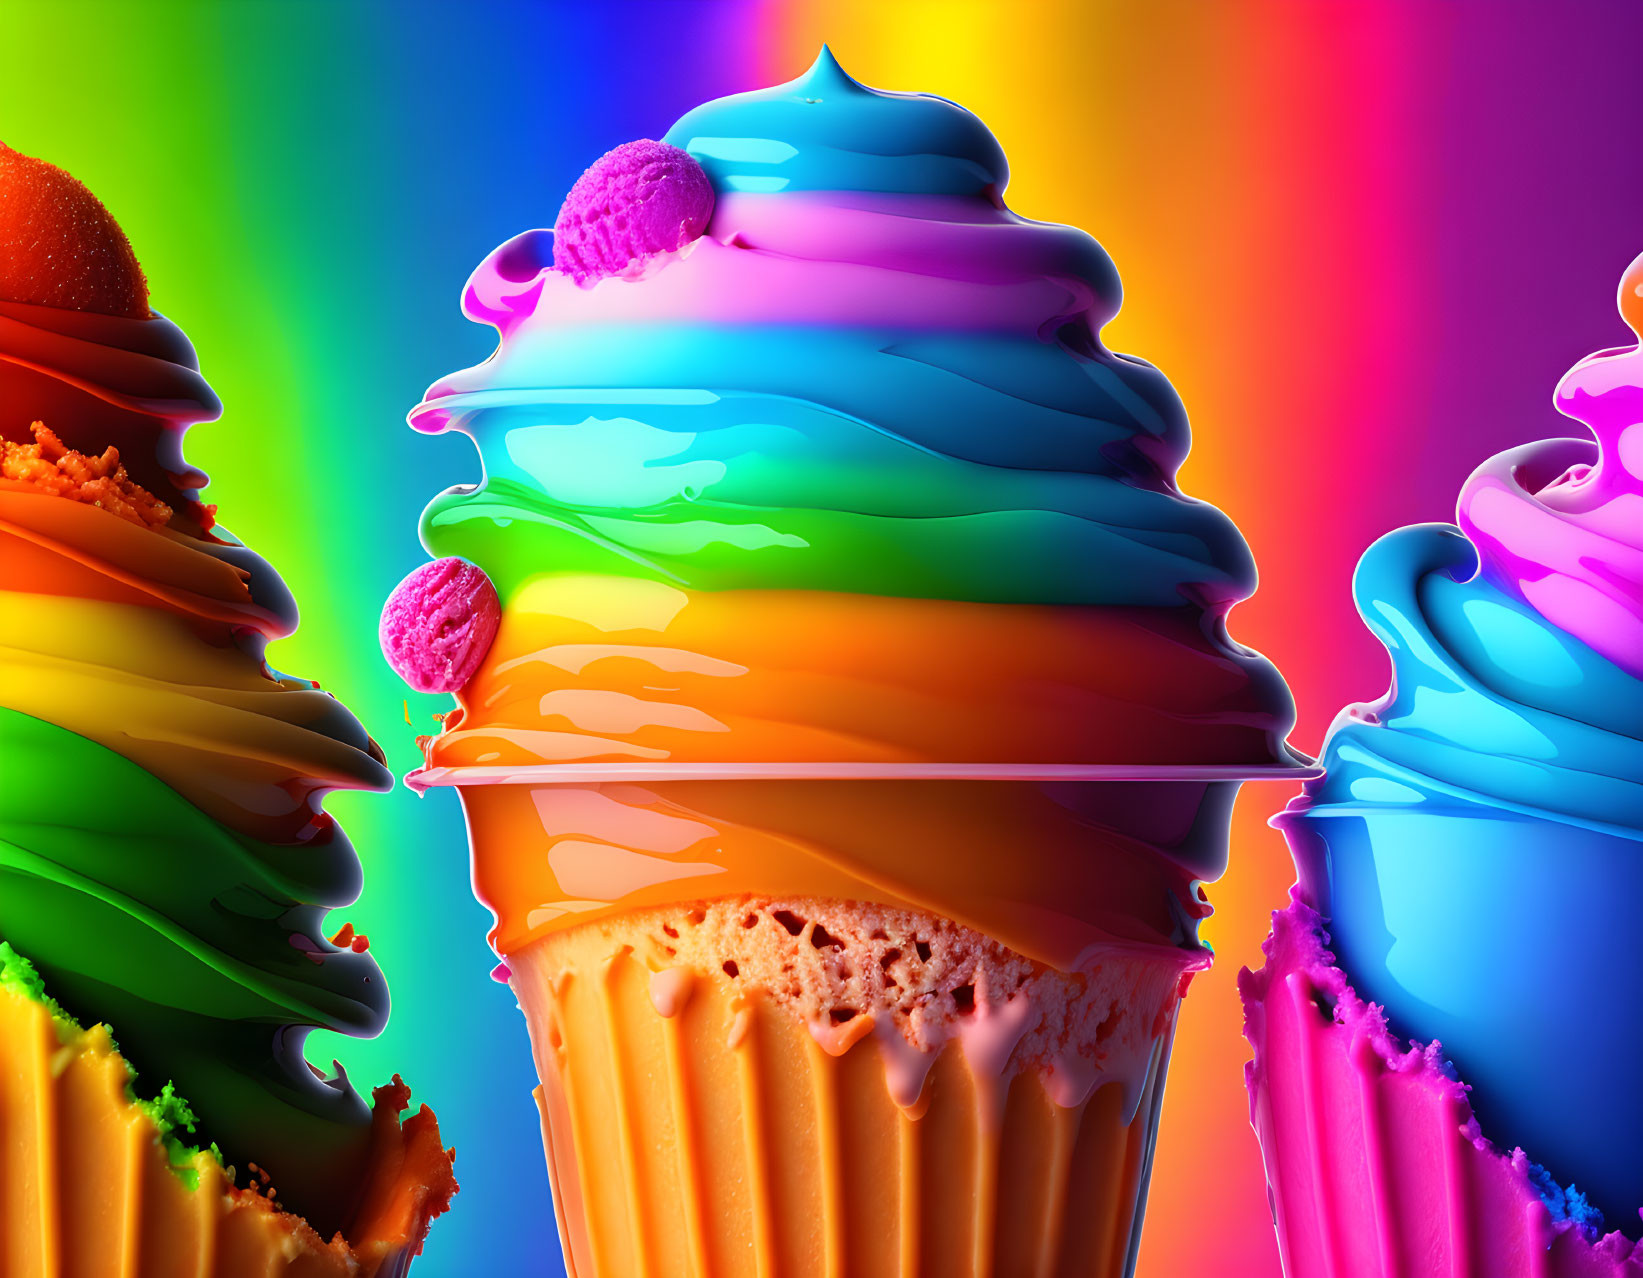 Colorful Cupcakes with Creamy Icing on Rainbow Background